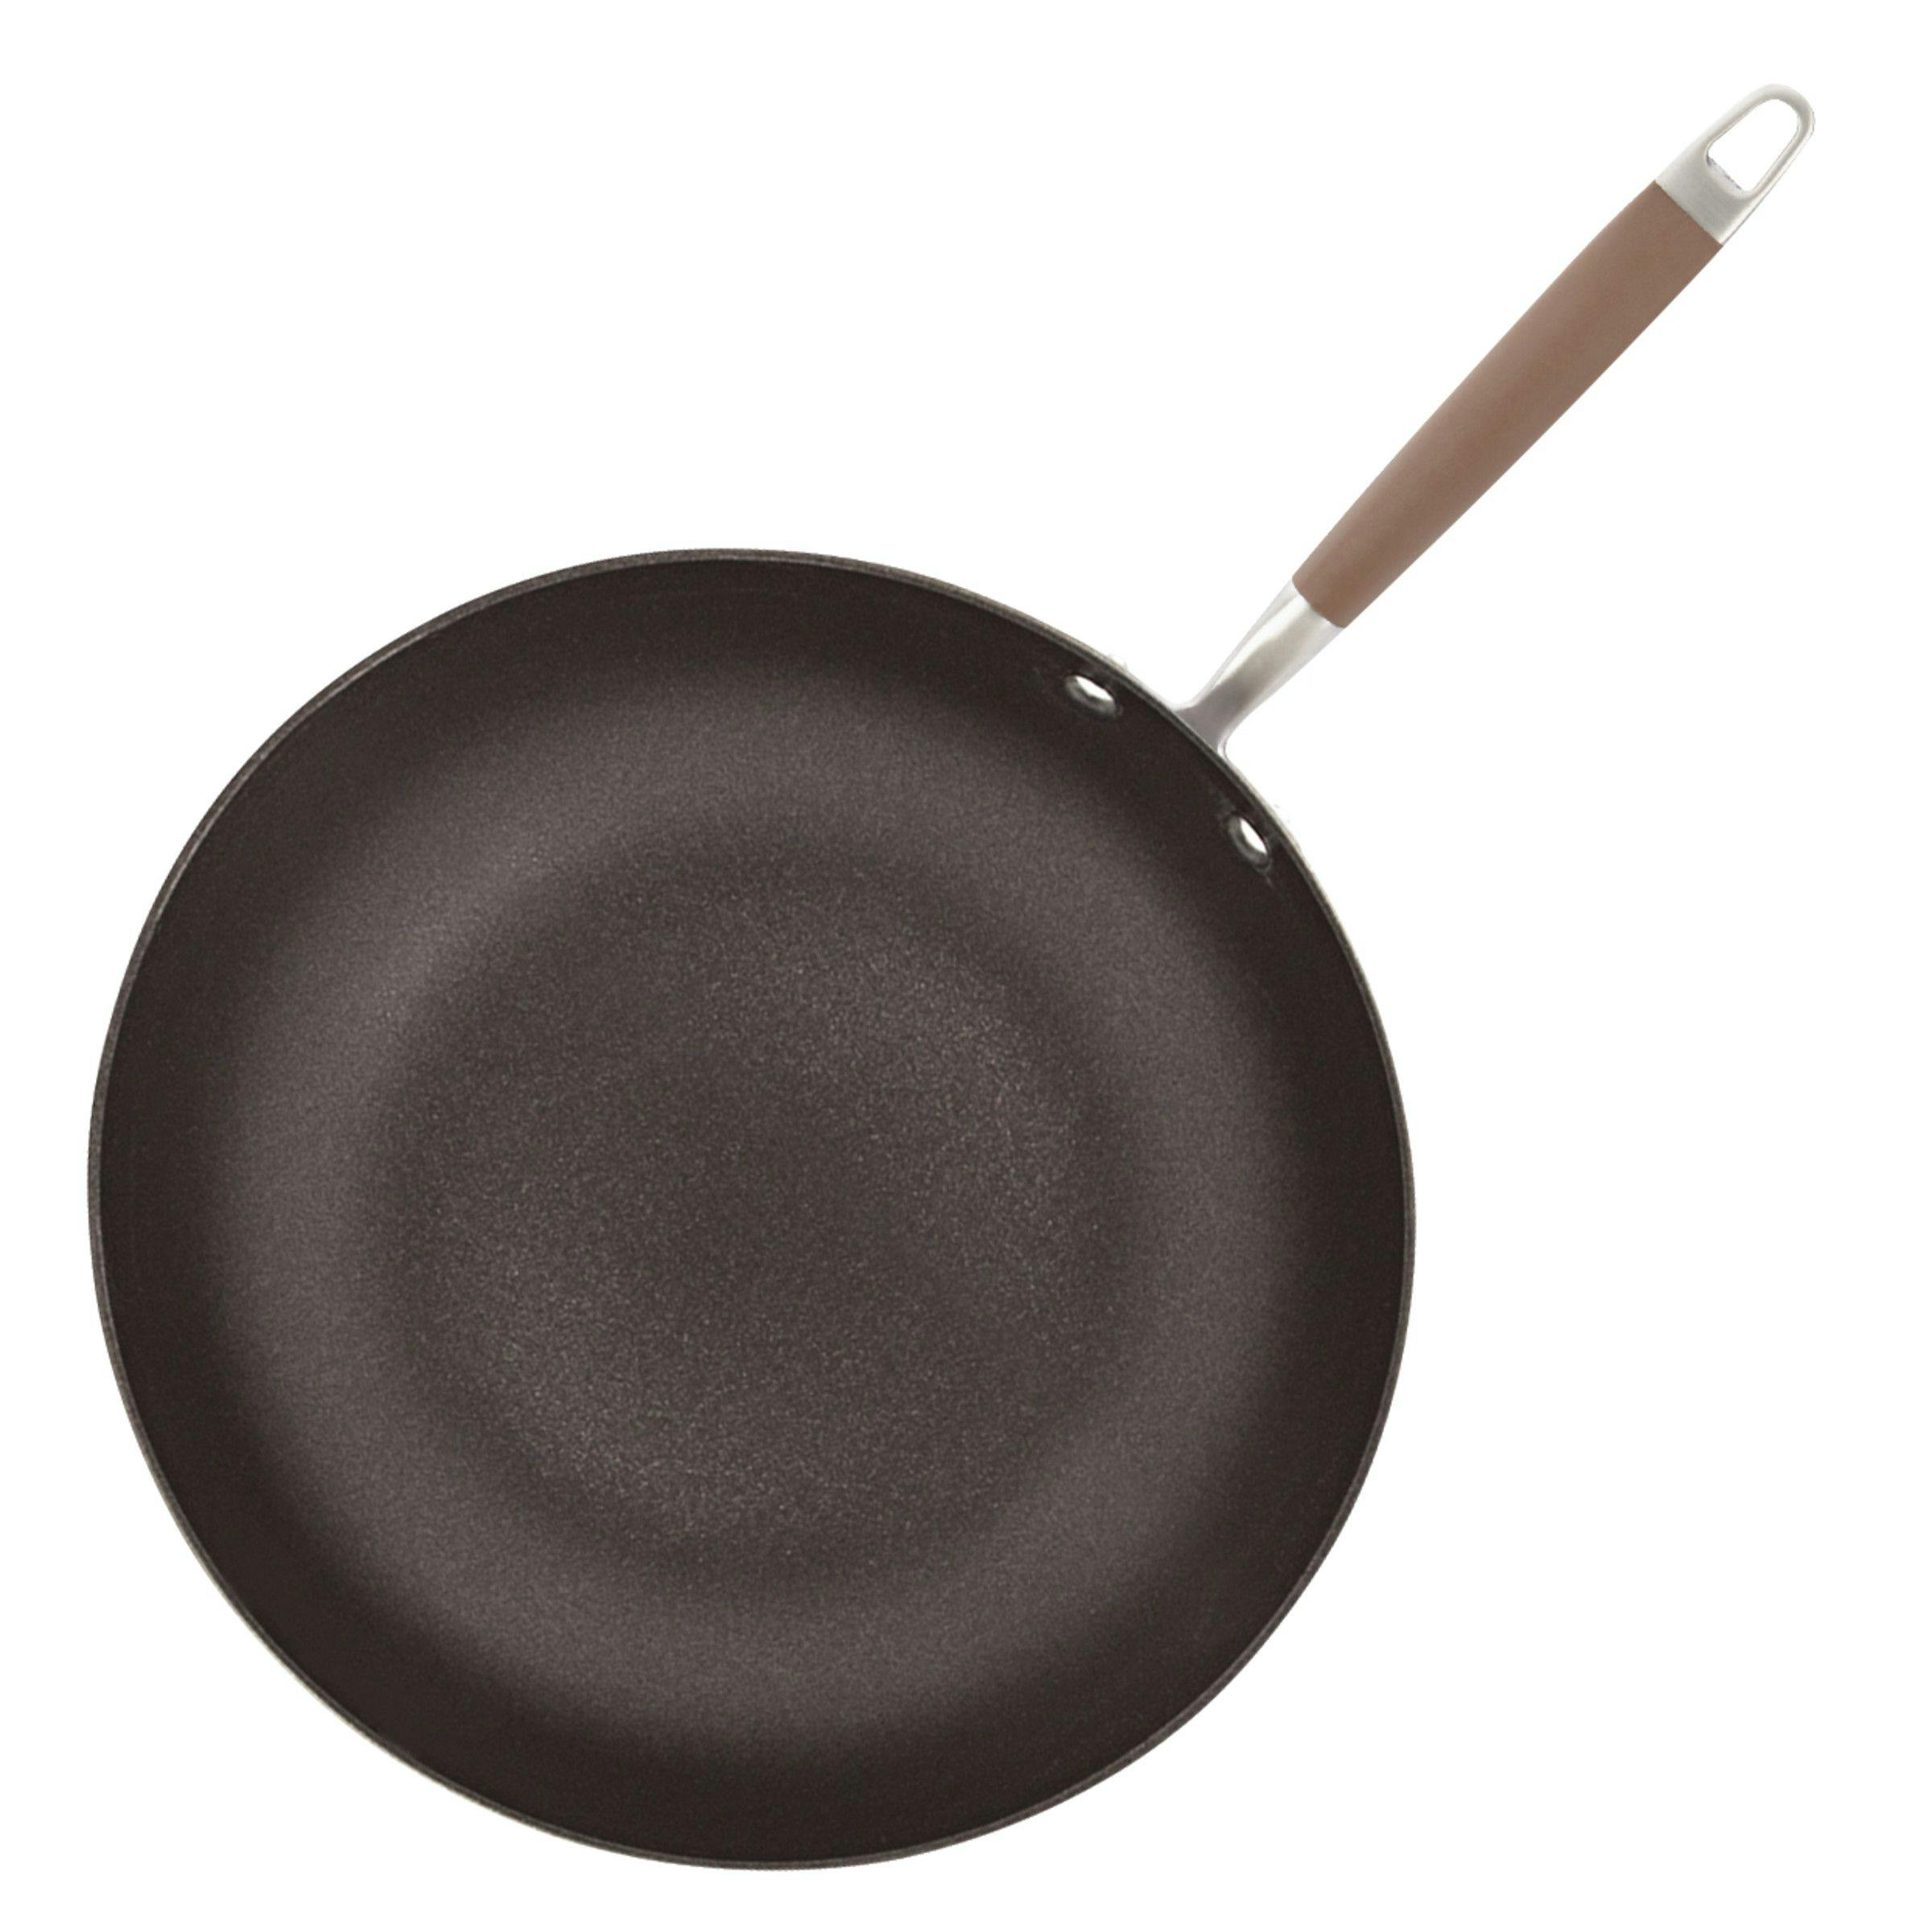 Anolon Advanced Home Hard-Anodized Nonstick Ultimate Pan with Lid, 12-Inch, Bronze